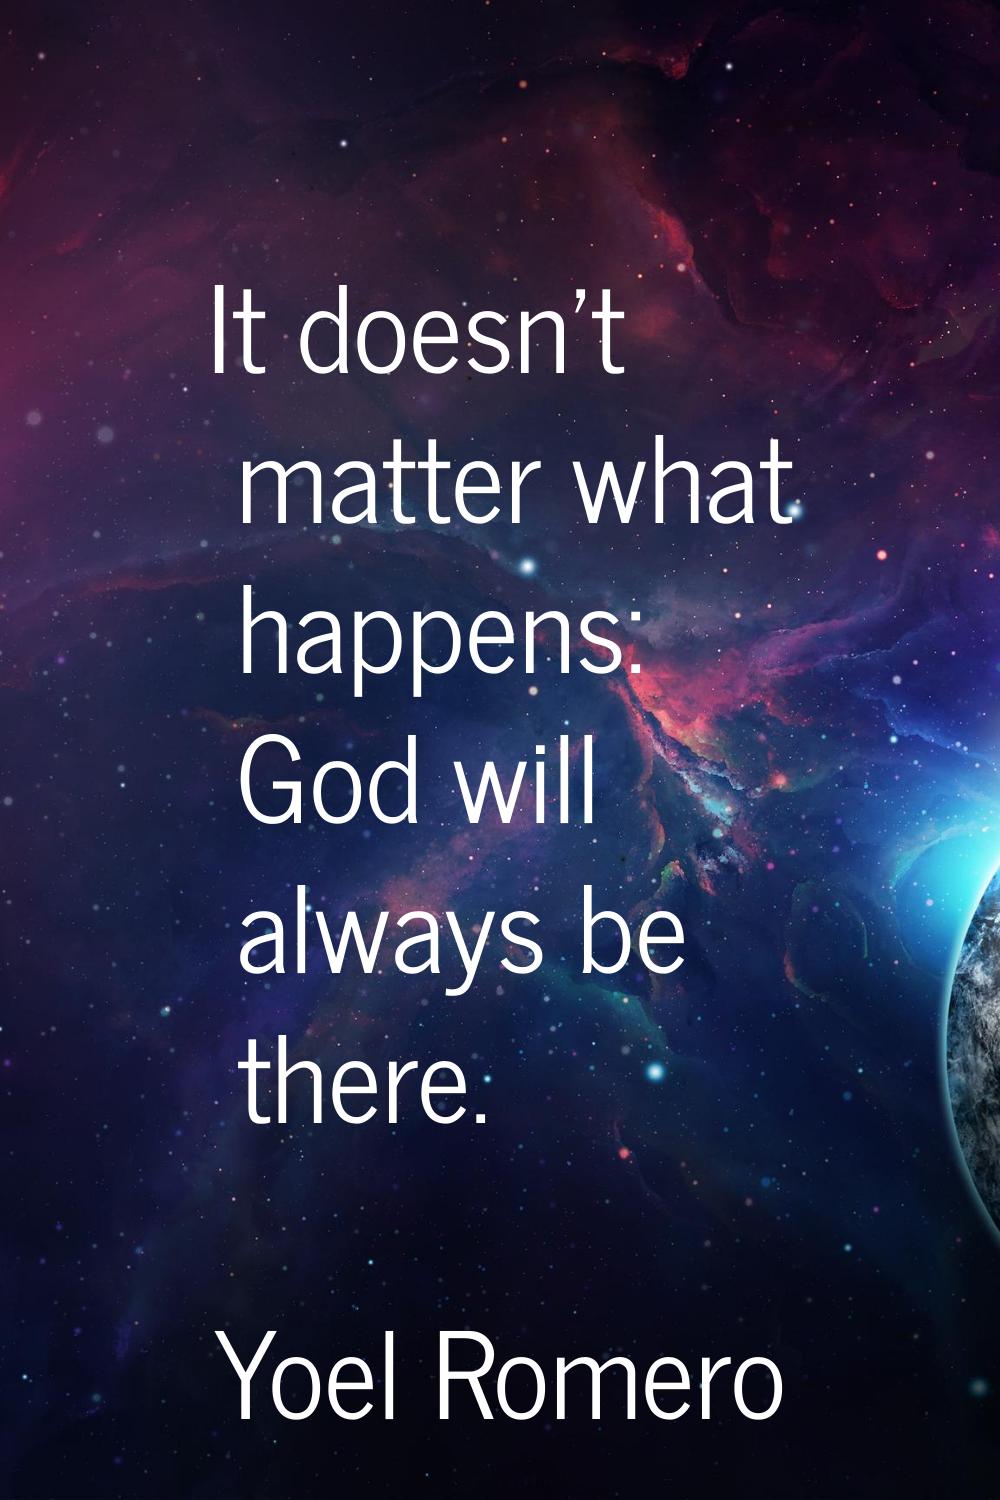 It doesn't matter what happens: God will always be there.